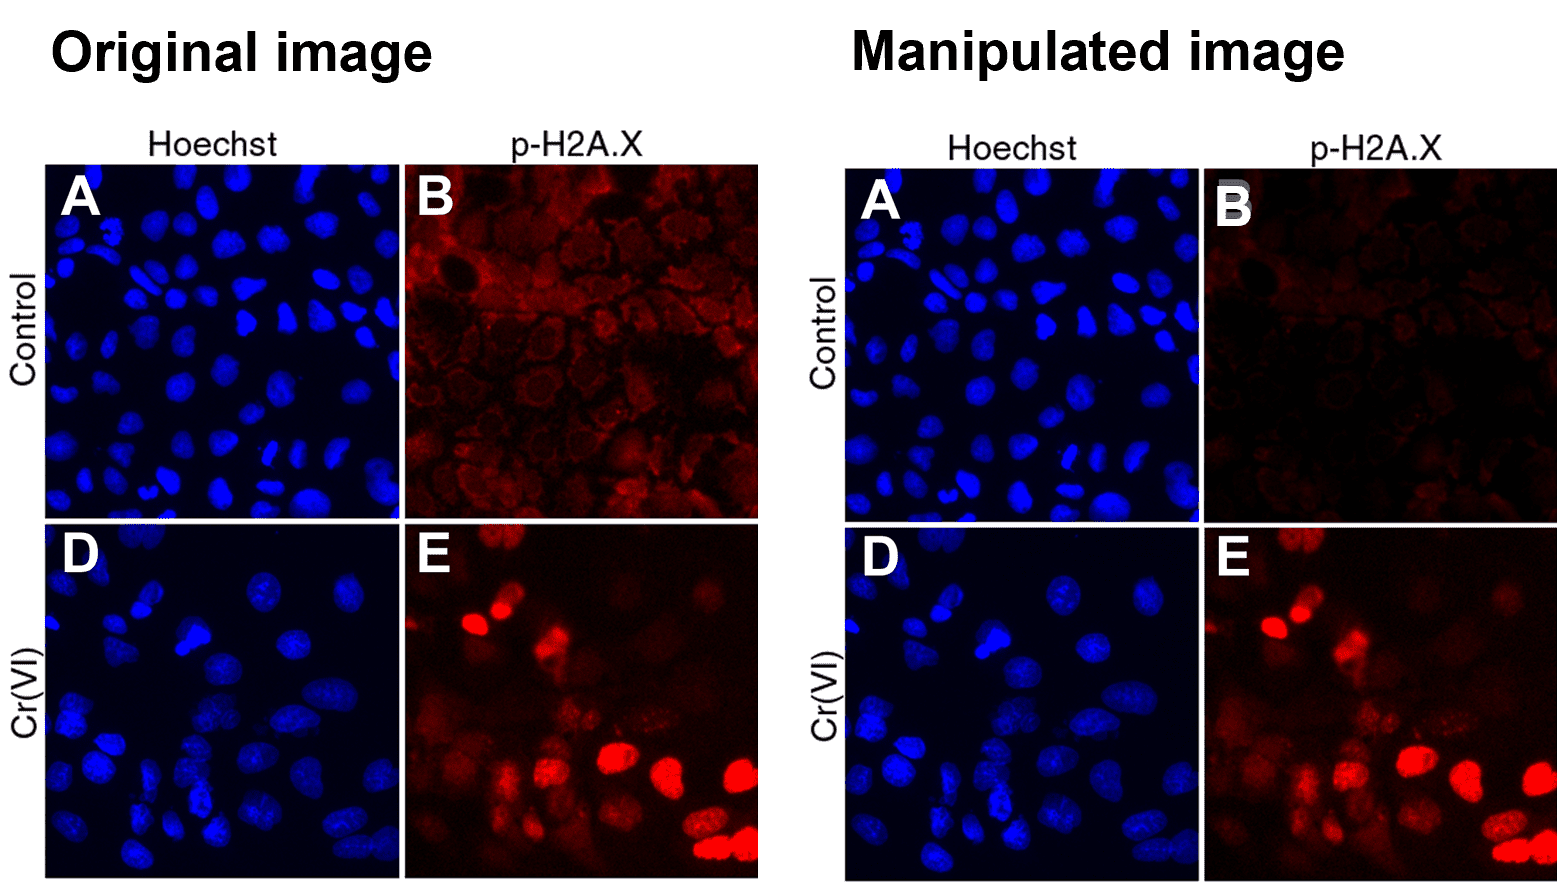 An example of tissue staining images whose exposure levels have not been adjusted uniformly.